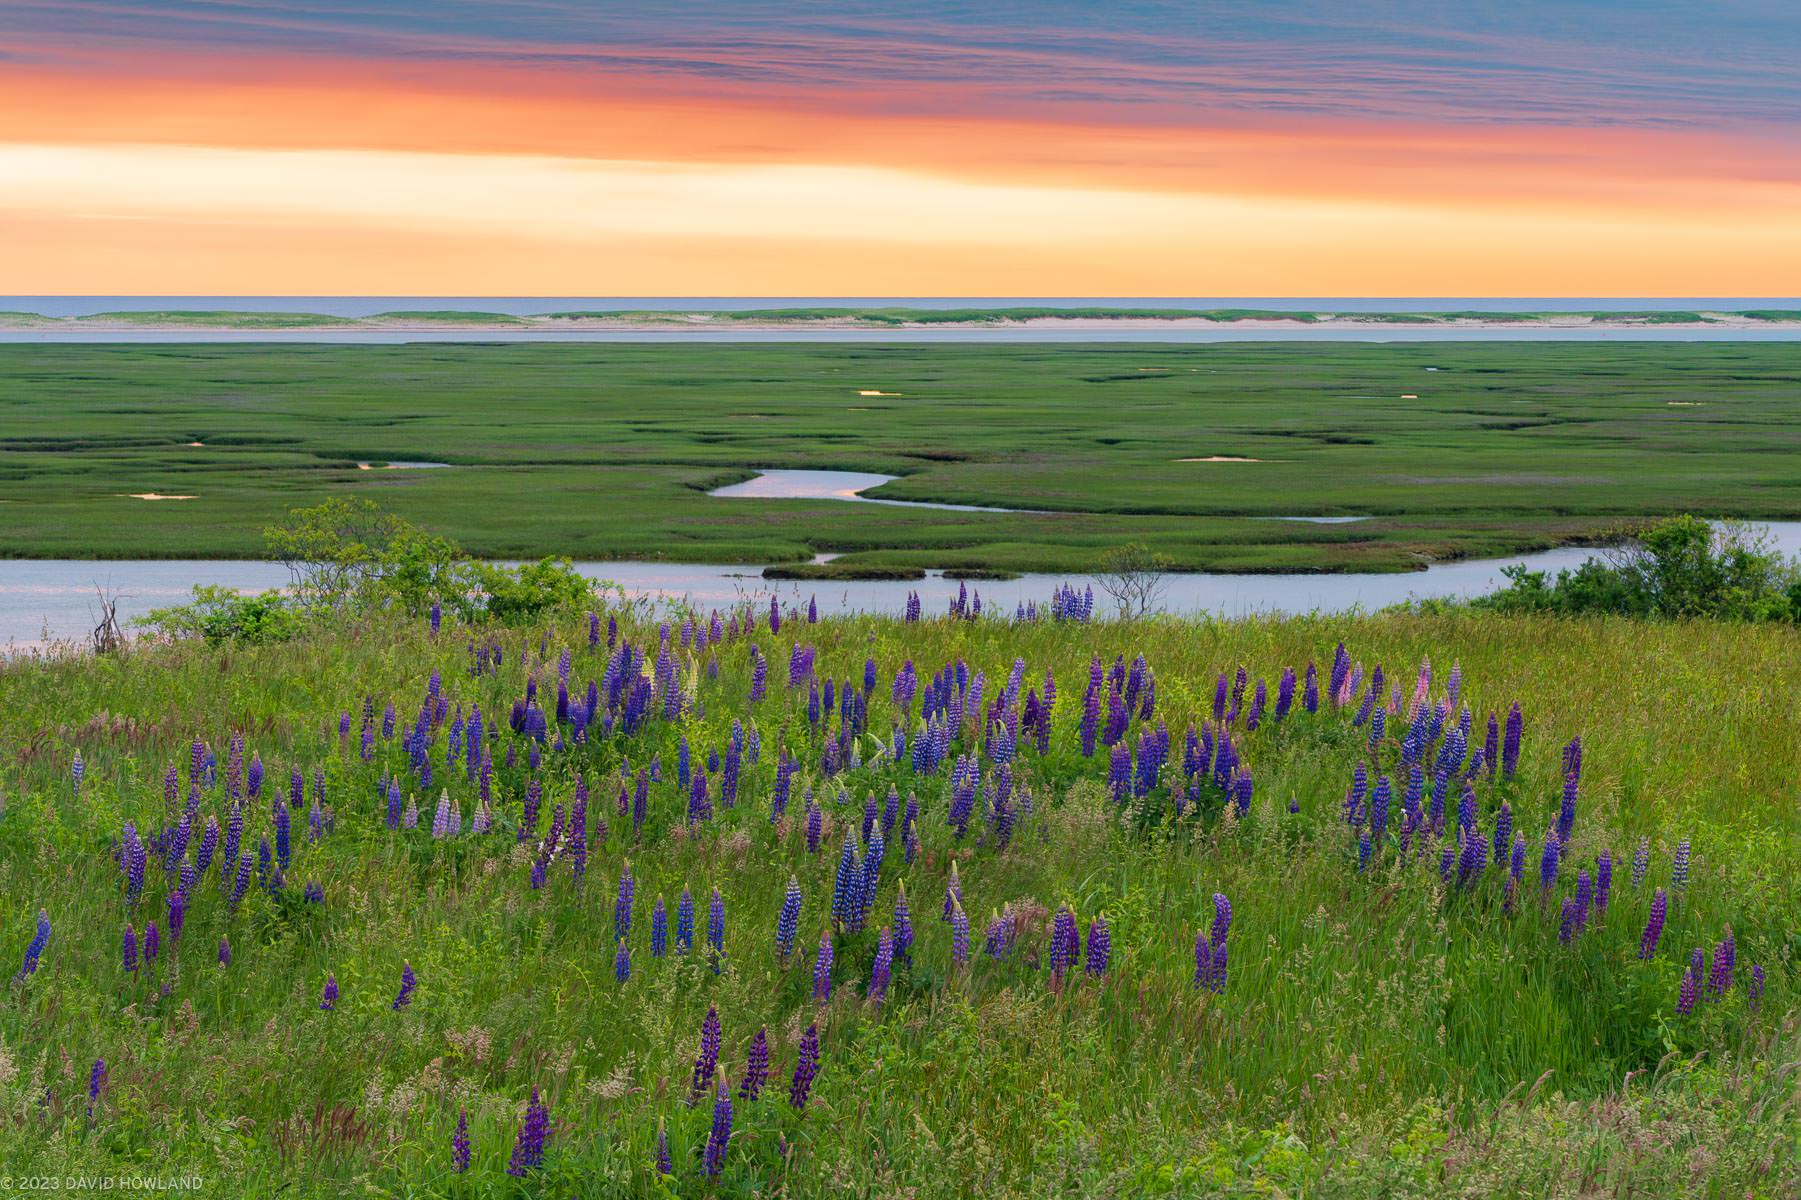 A photo of the sun rising over a field of lupine wildflowers and a Cape Cod salt marsh.